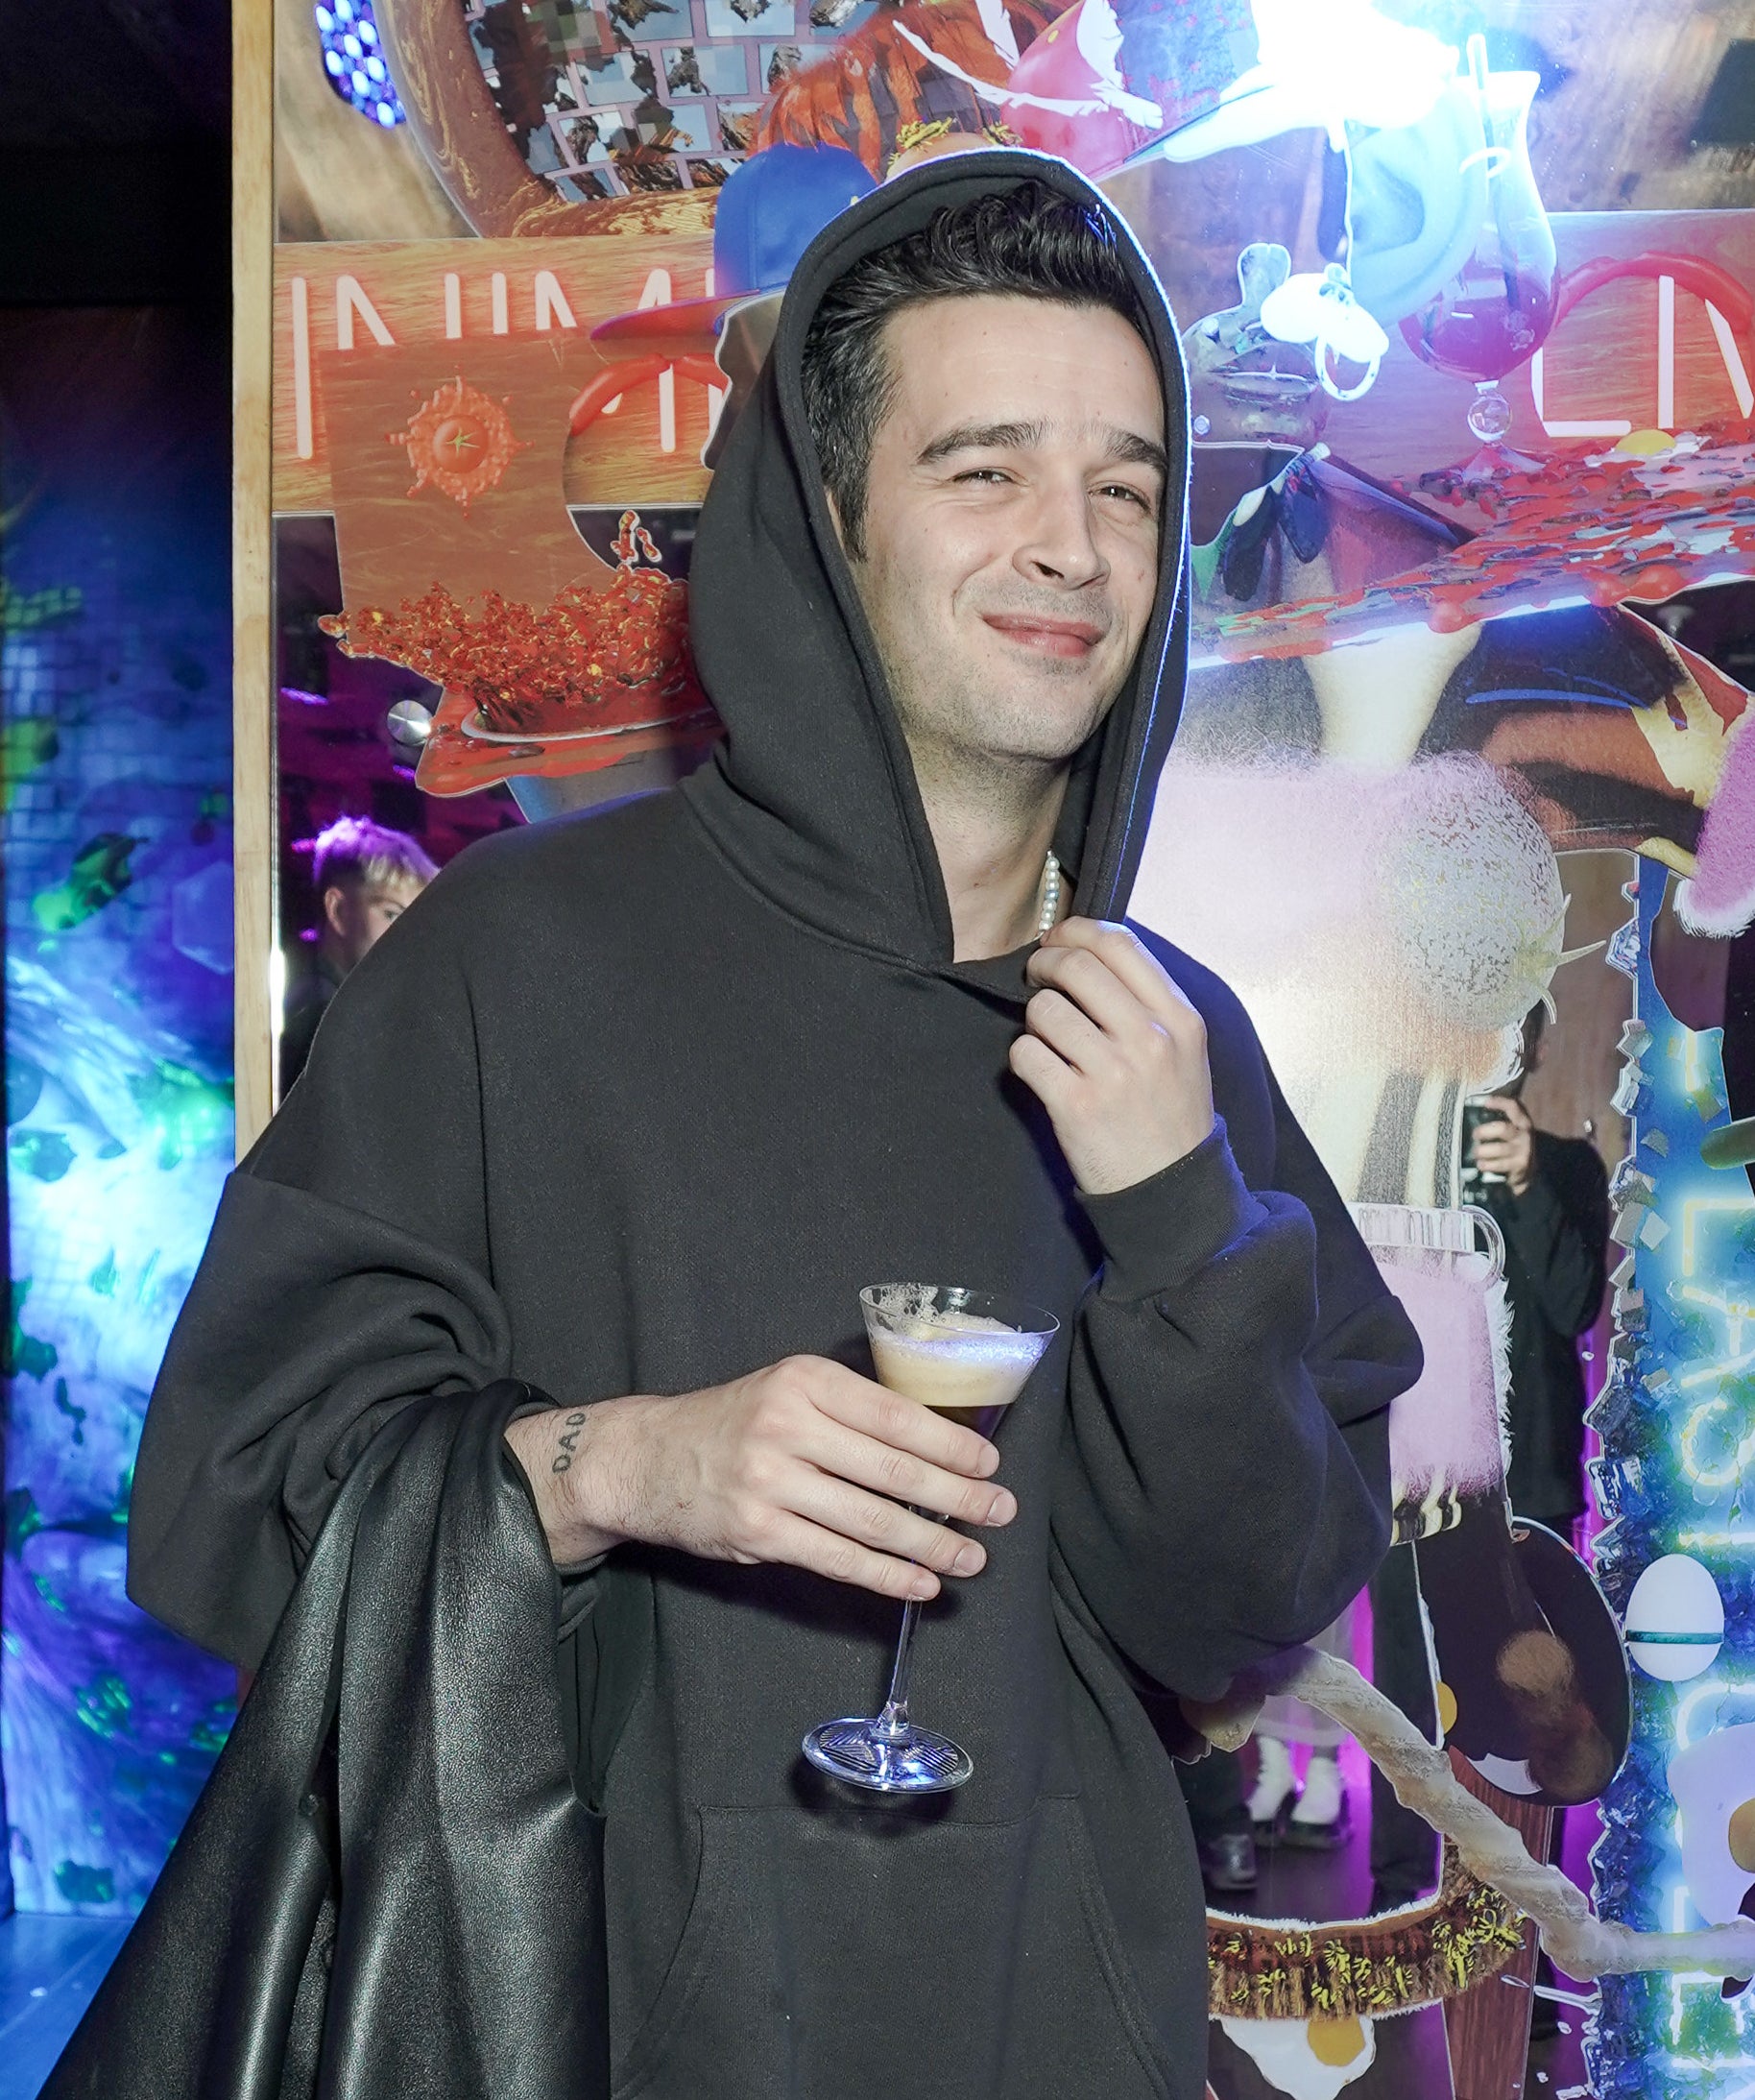 Close-up of Matty in a hoodie and holding a drink